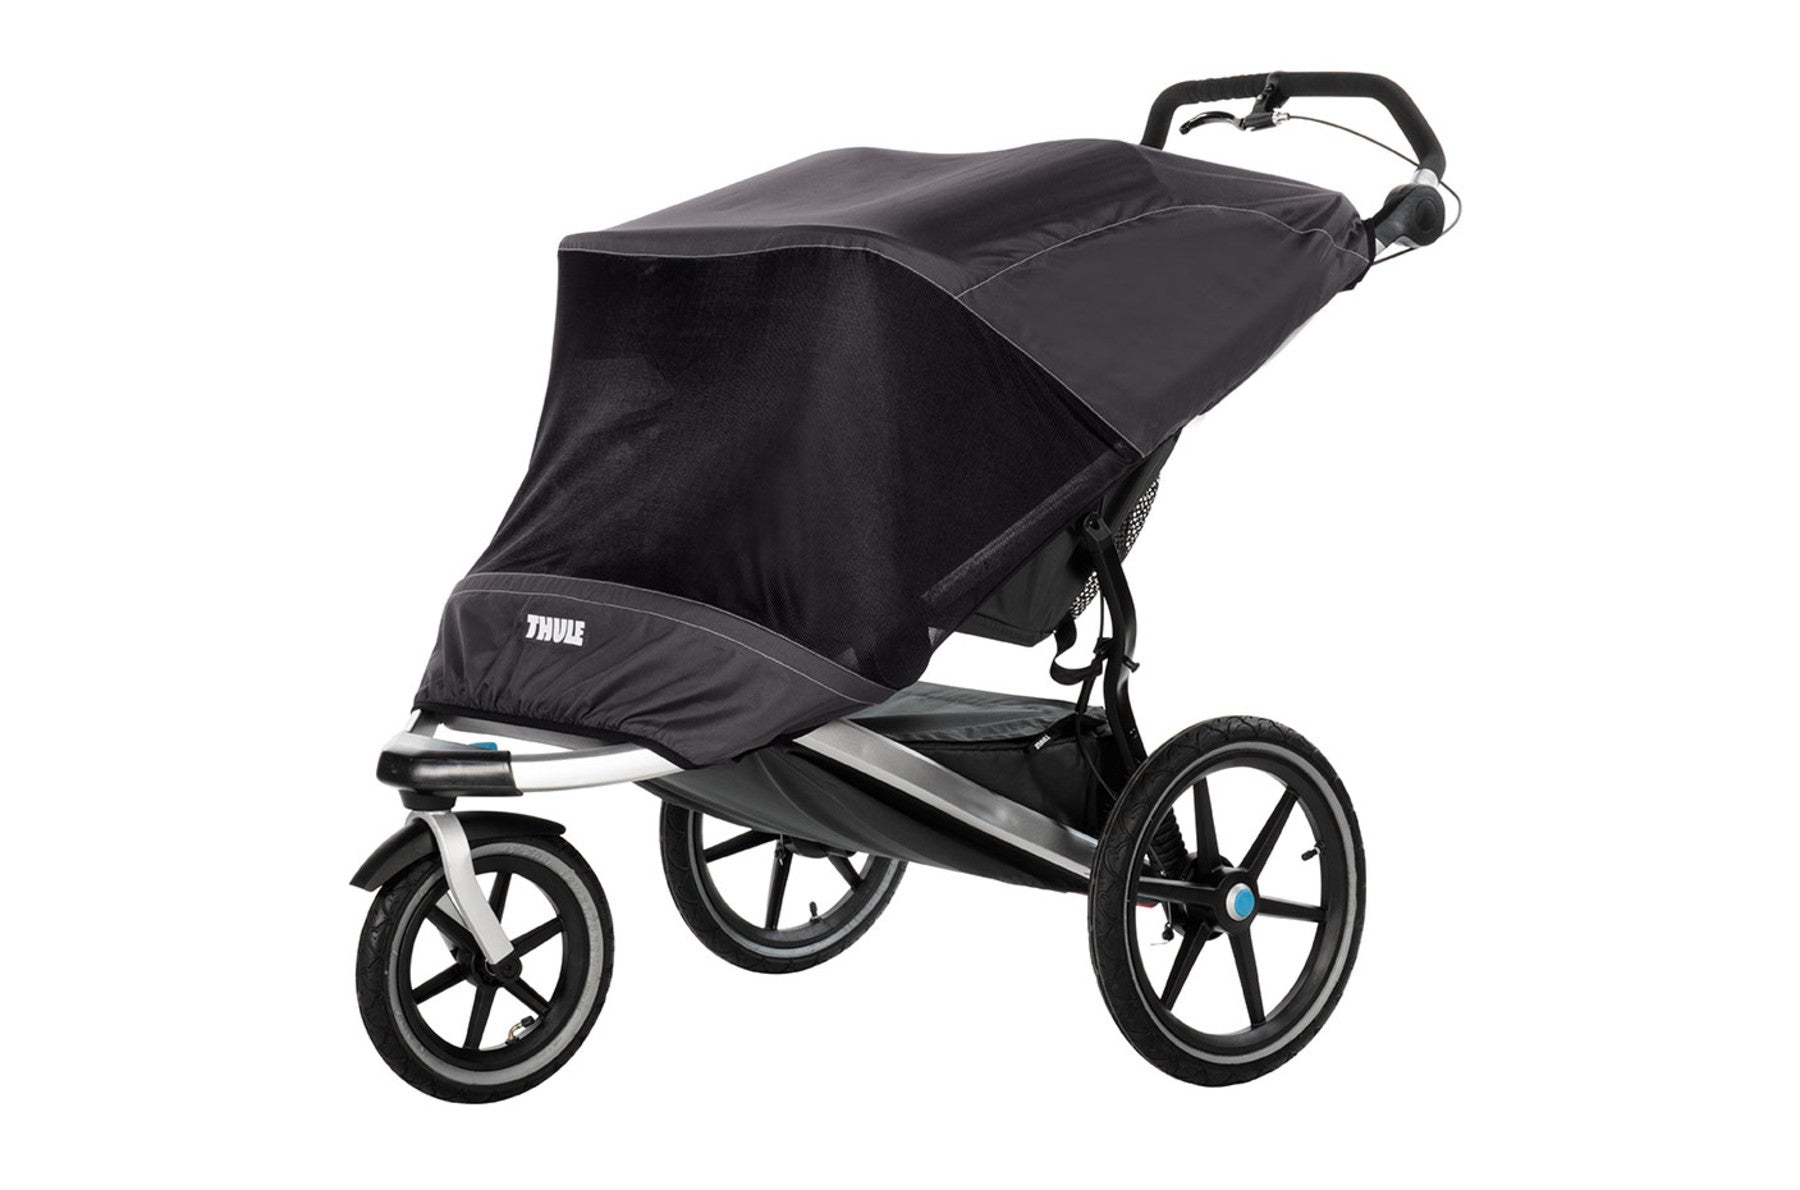 THULE Mesh Cover for Urban Glide Double Stroller - ANB Baby -$50 - $75